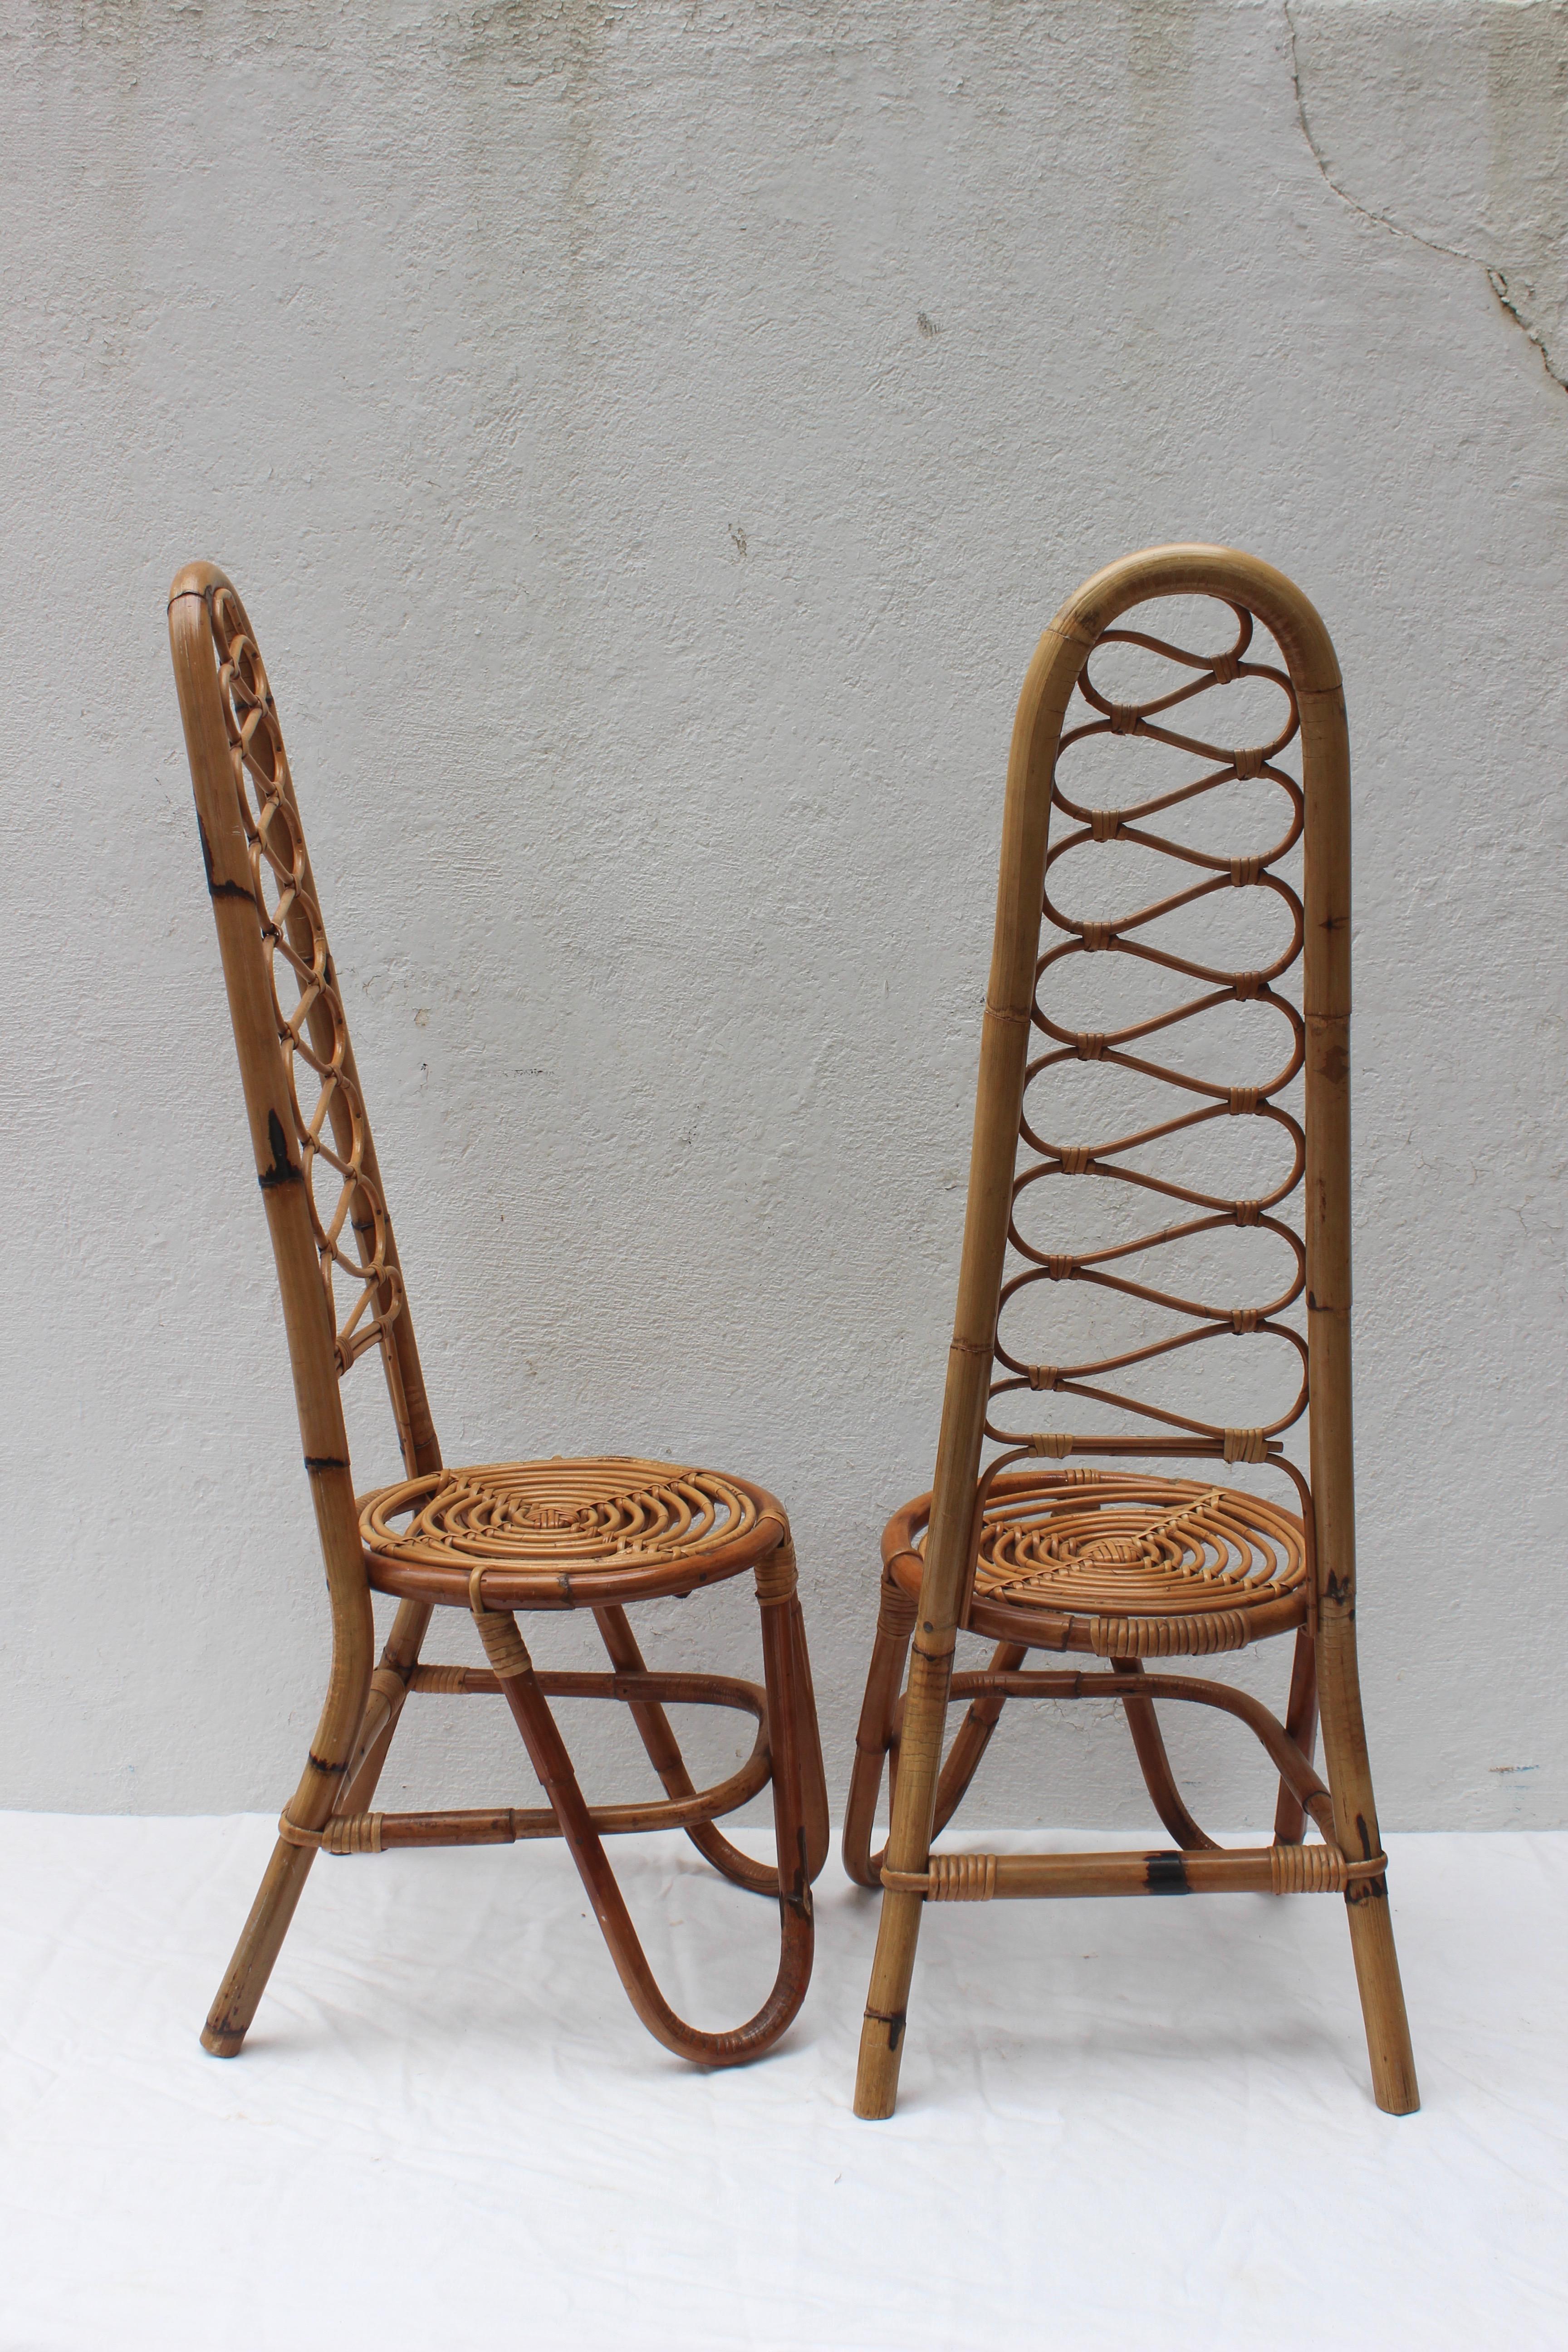 Pair of Italian rattan chairs, having round seat and S form back.